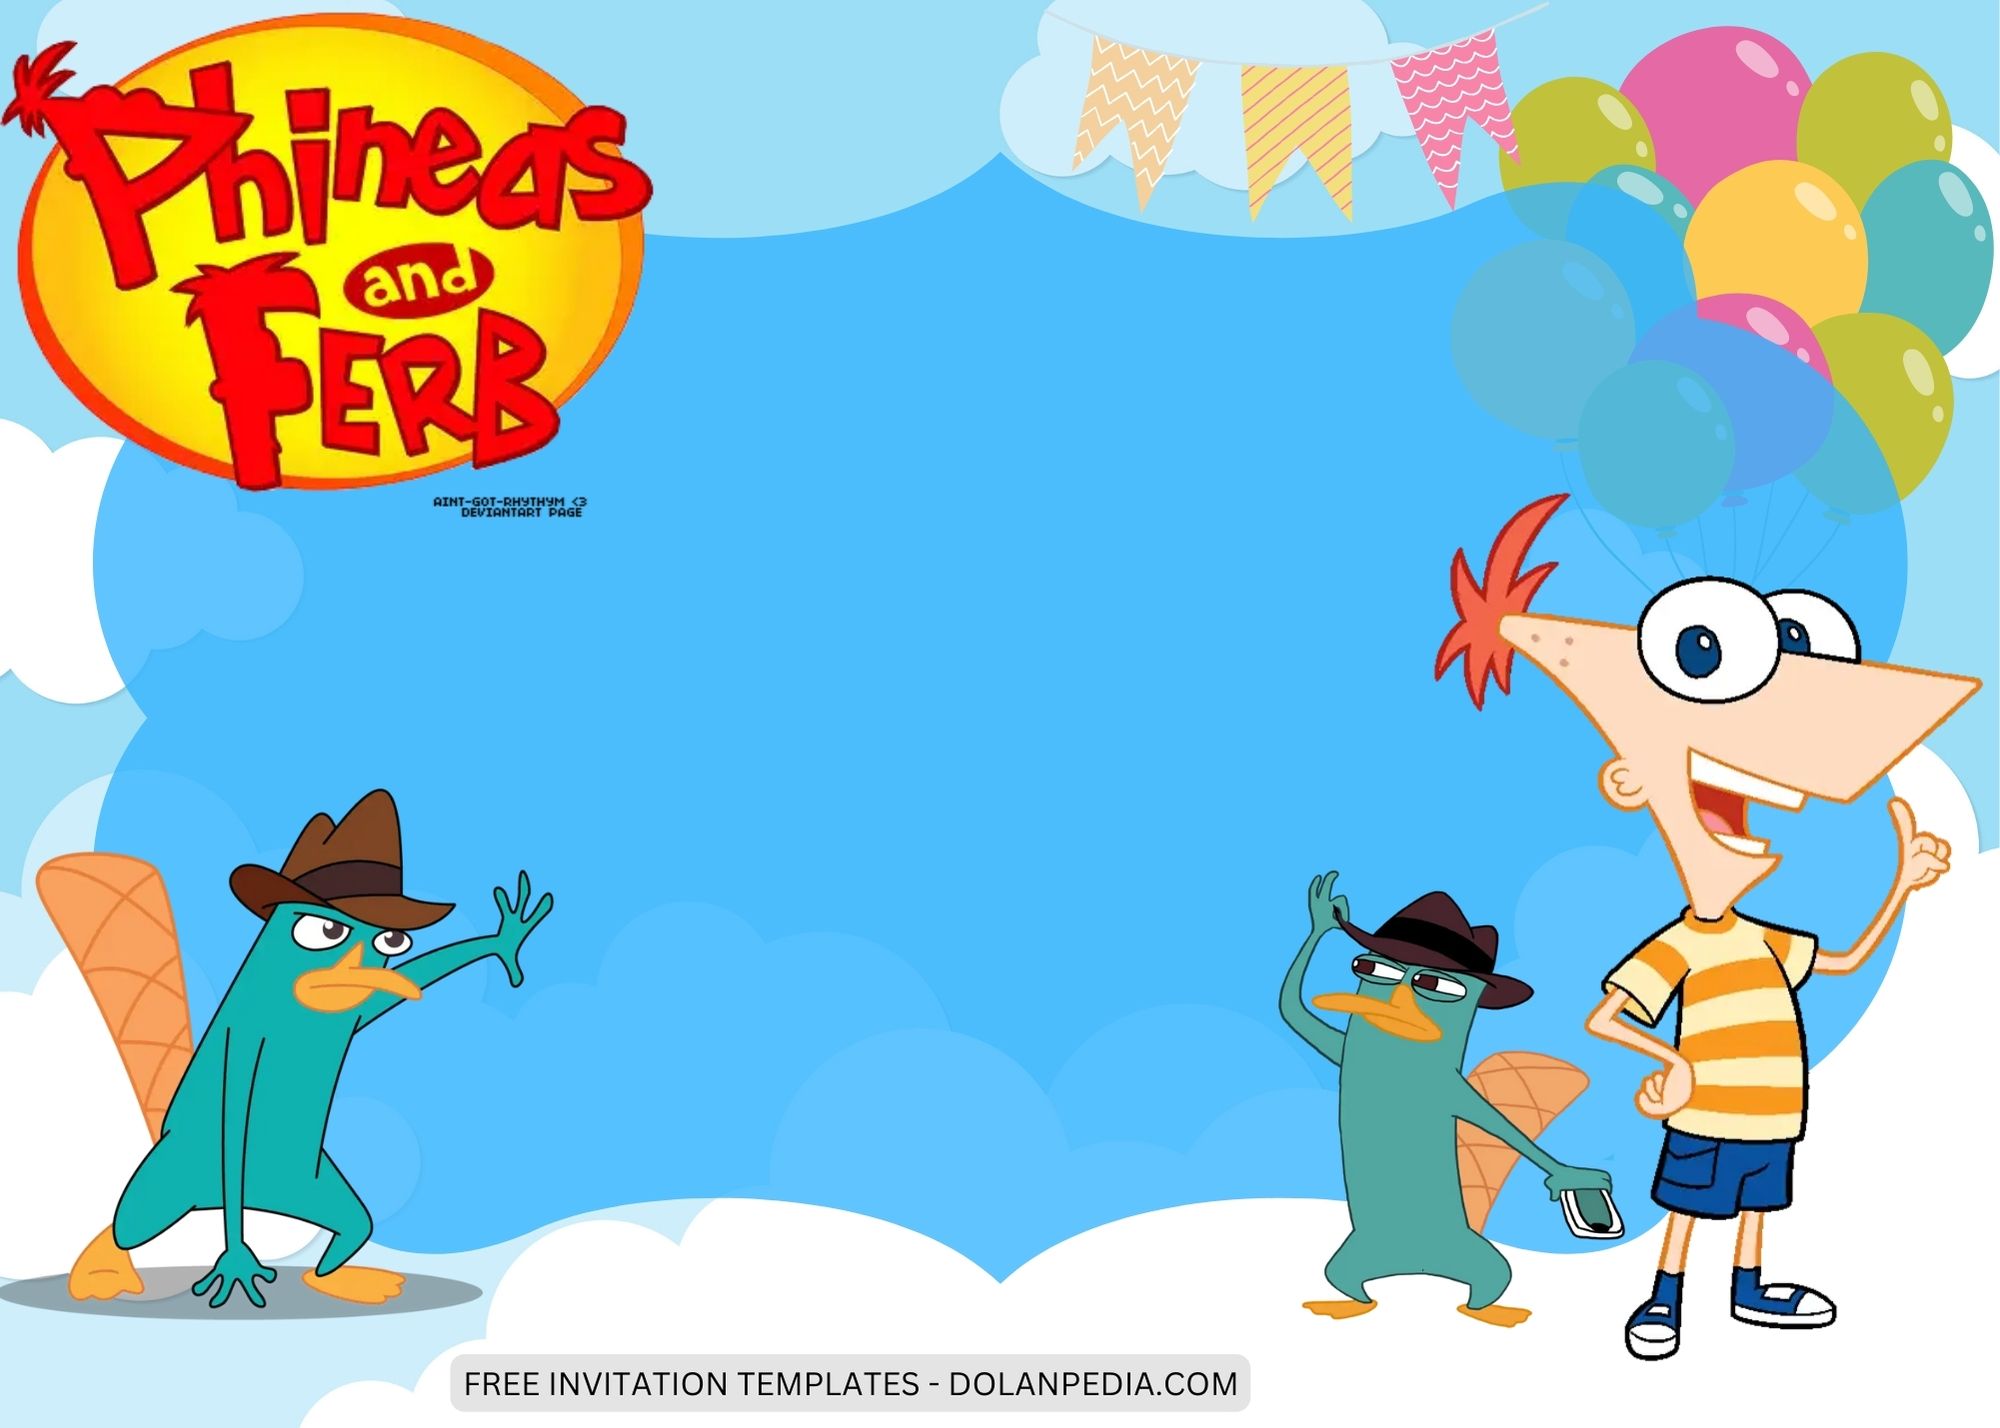 Blank Phineas and Ferb Birthday Invitation Templates Seven